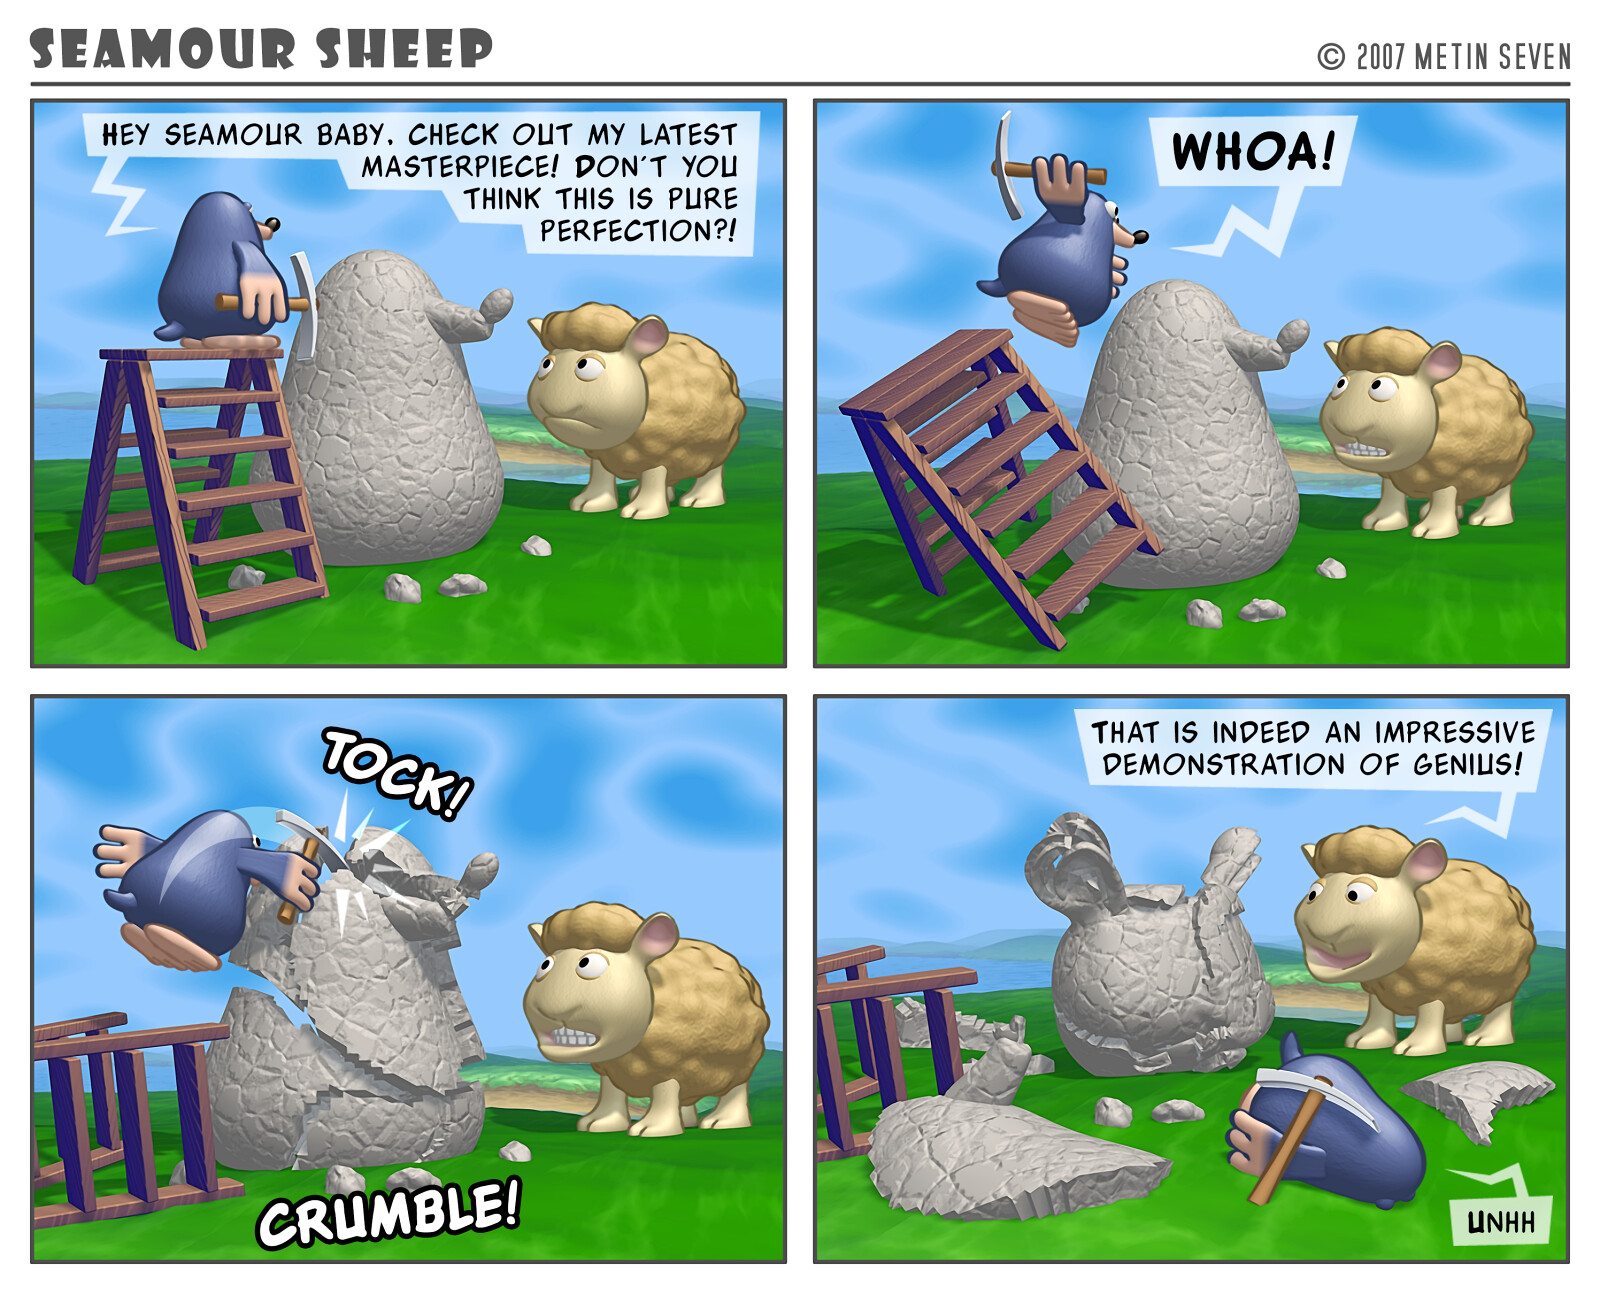 Seamour Sheep and Marty Mole comic strip episode: Masterpiece